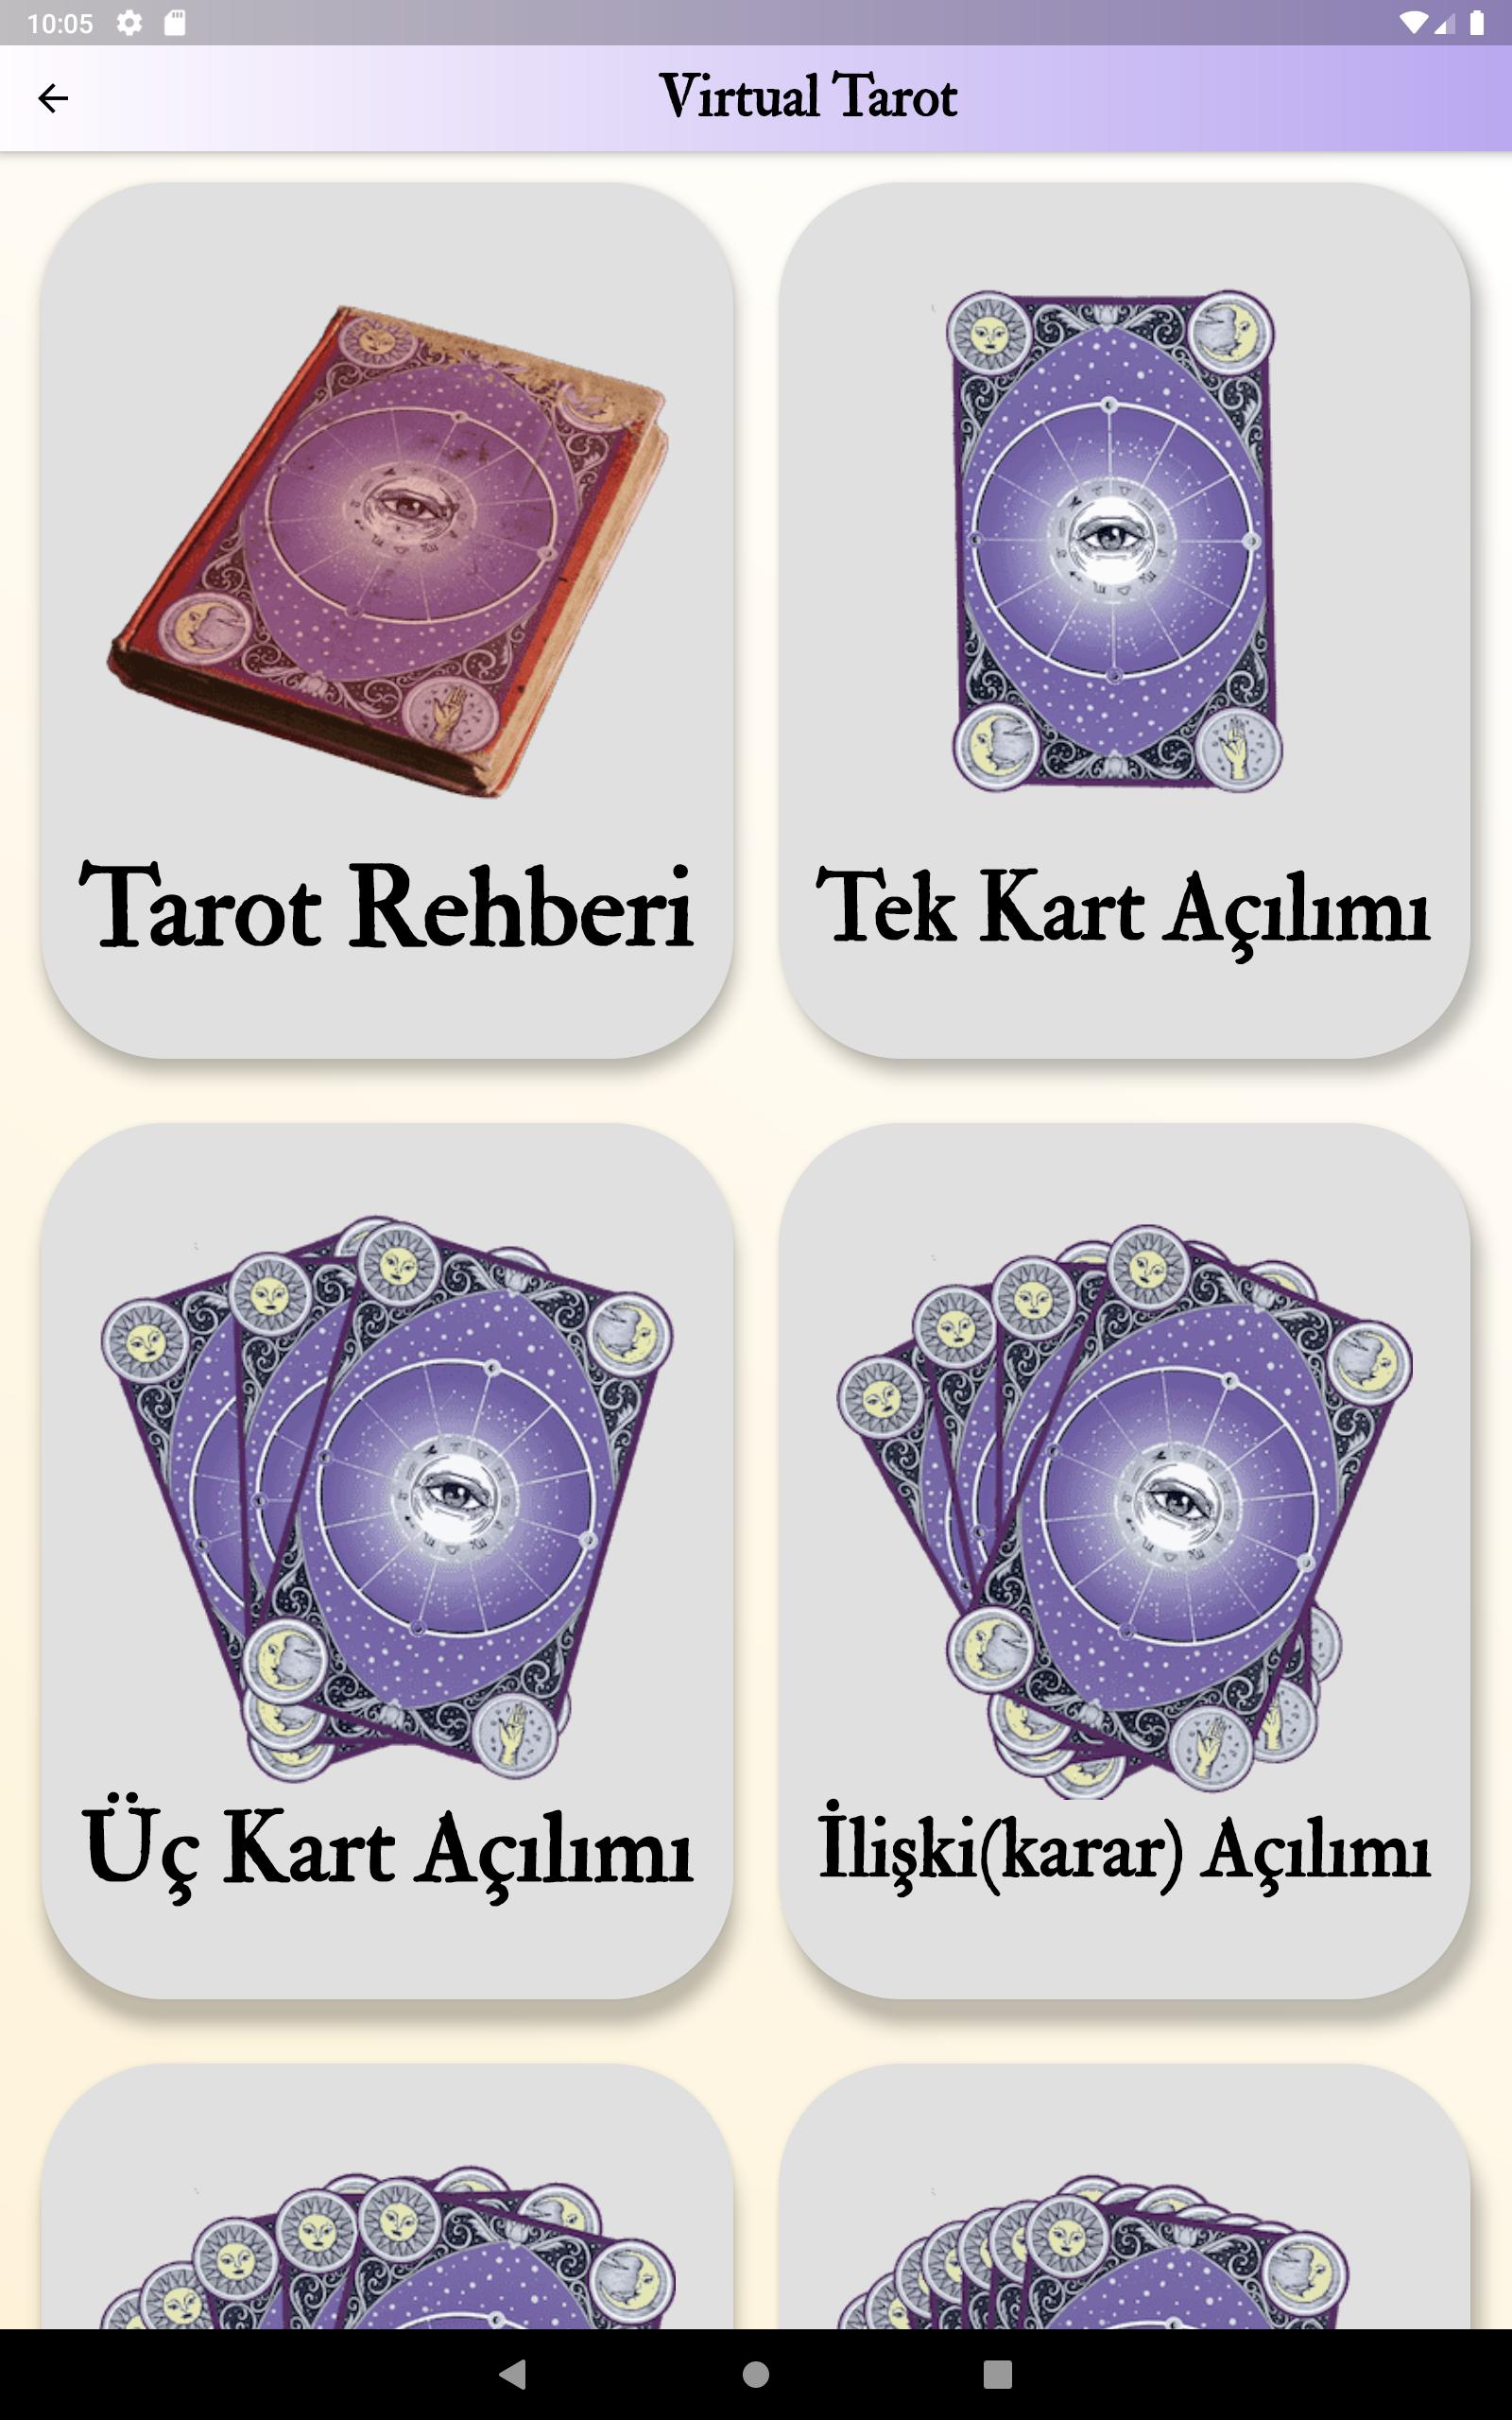 Virtual Tarot for Android - APK Download